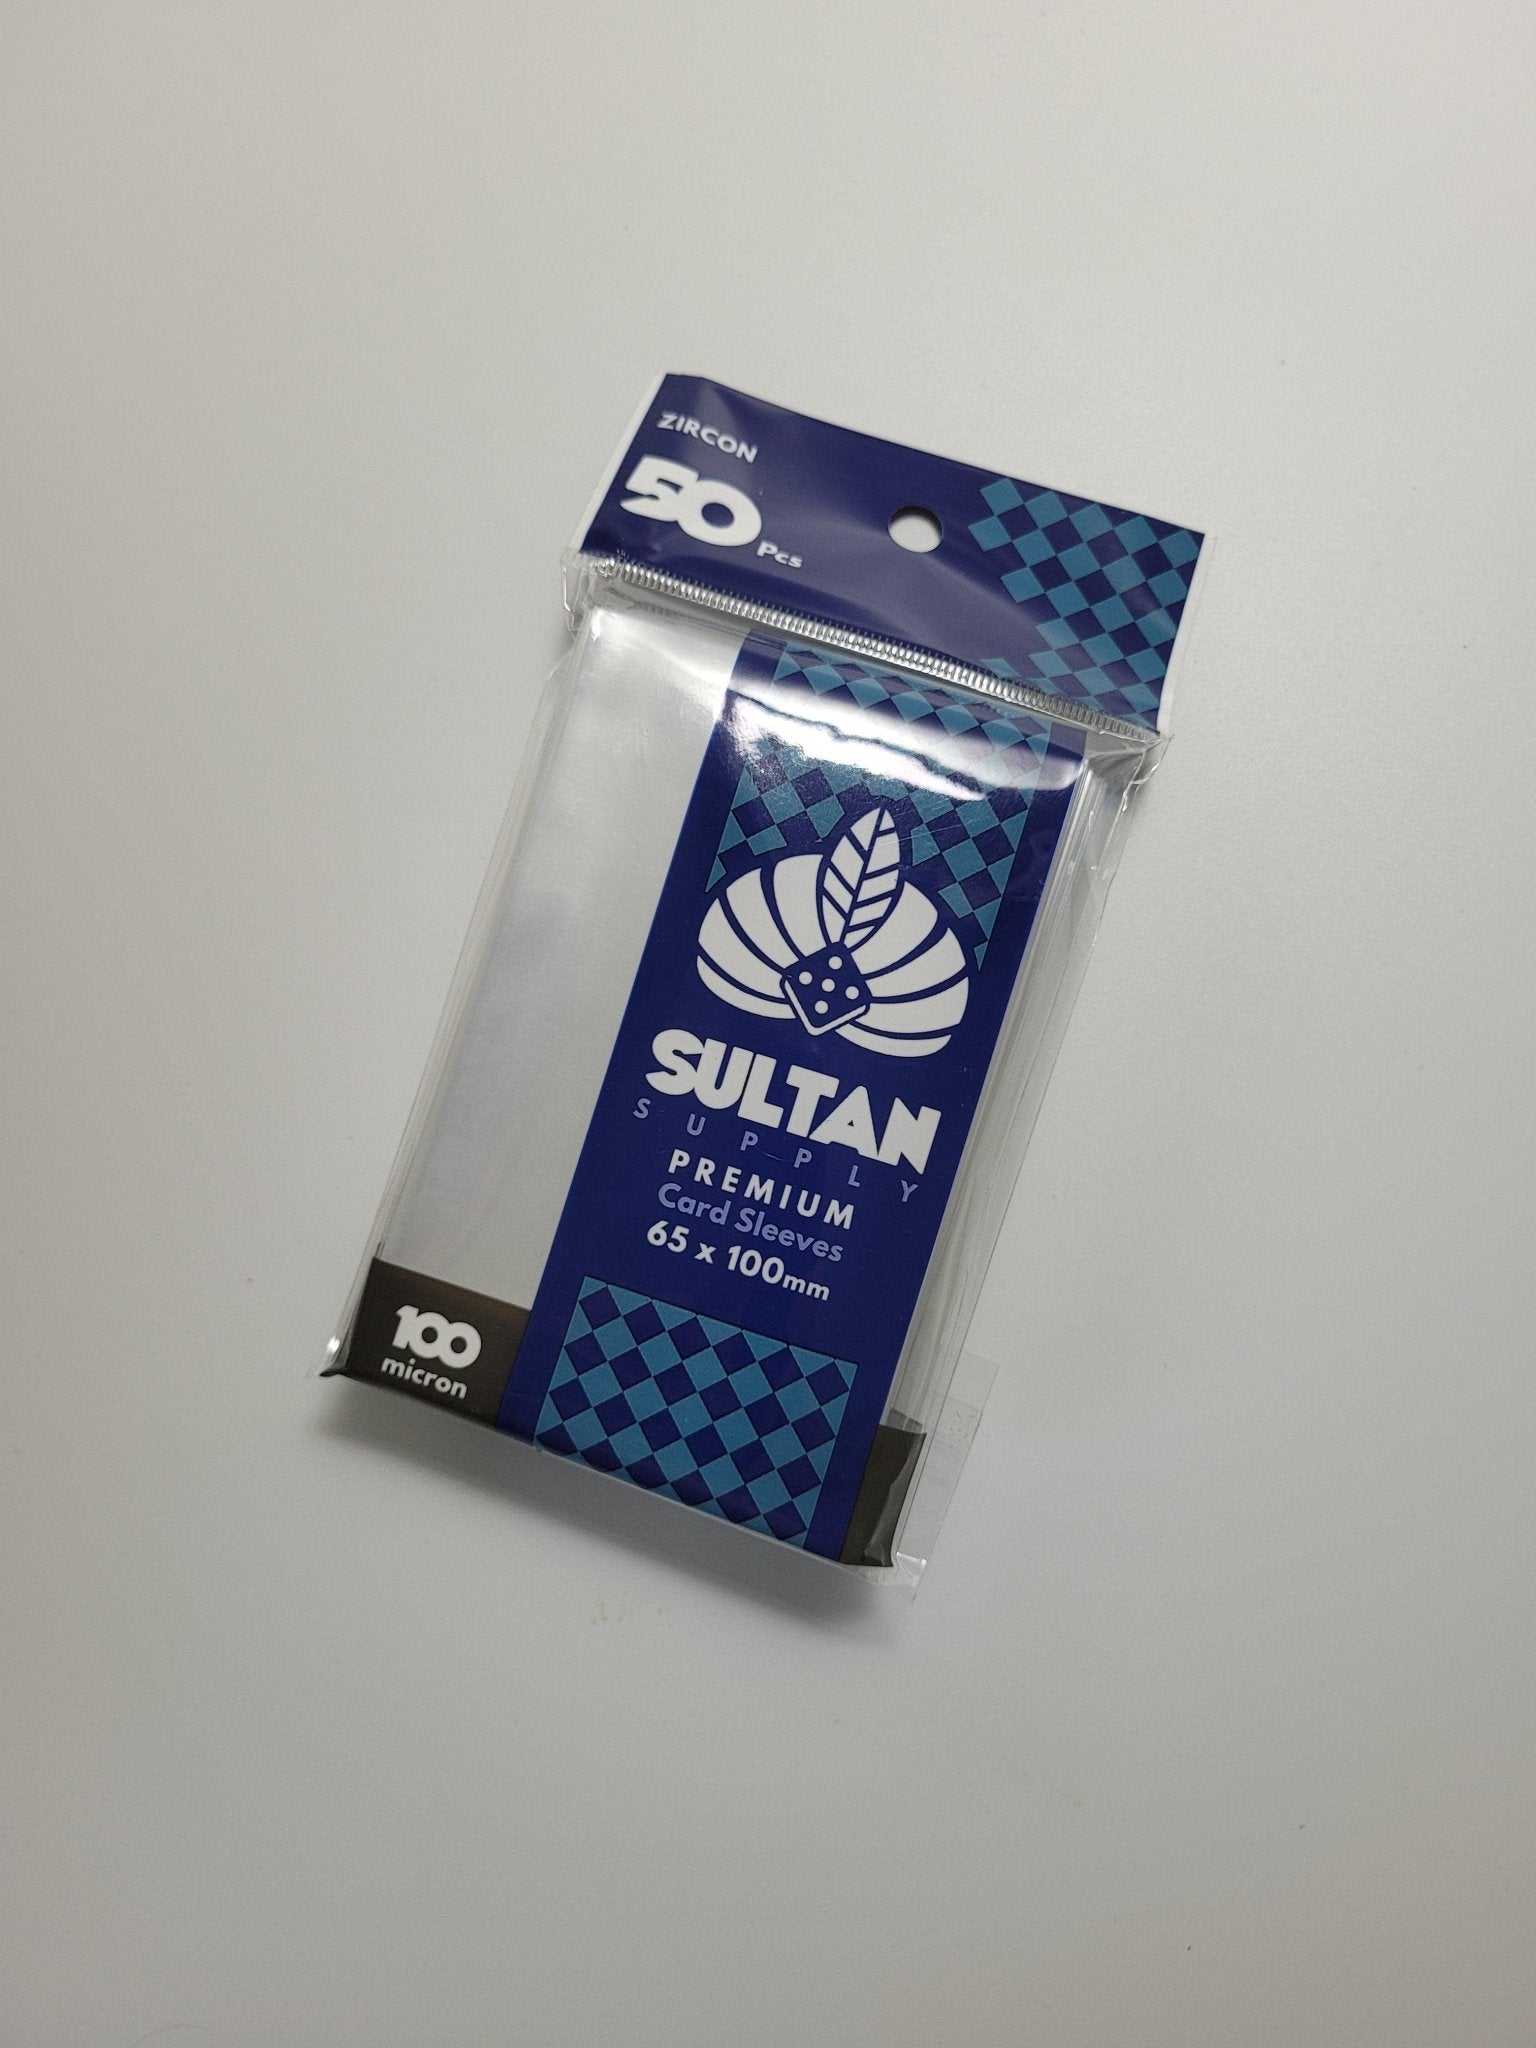 Sultan Supply Premium Card Sleeves: 65 x 100 mm Zircon (100 microns) - Gaming Library